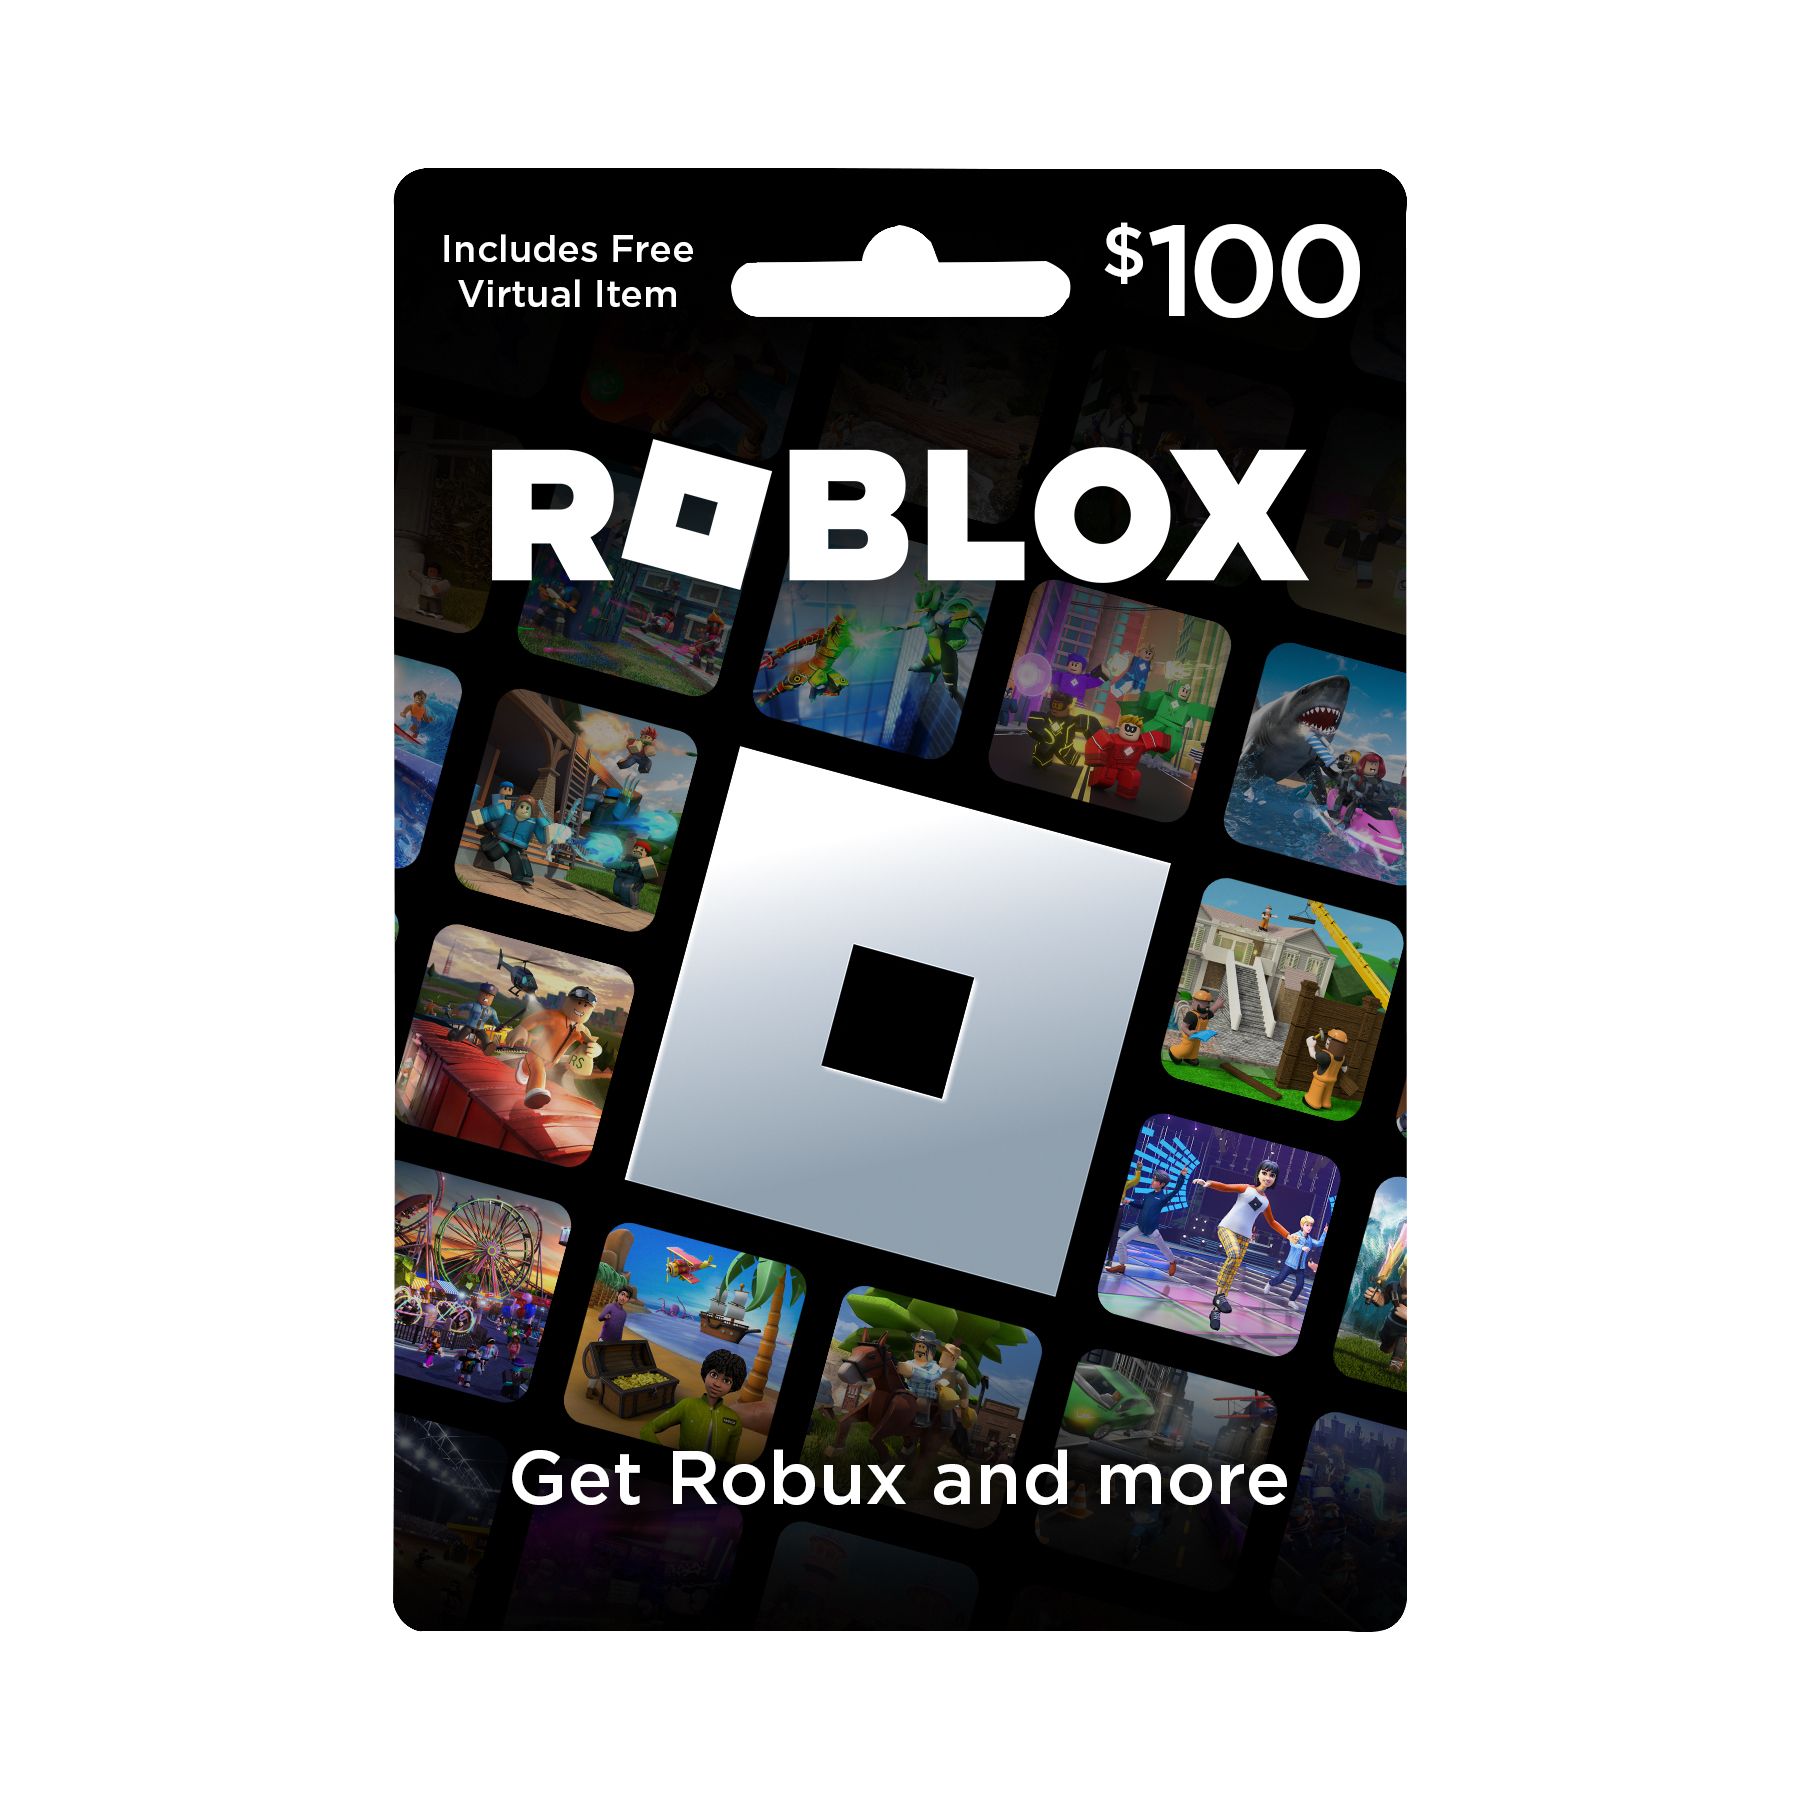 Roblox $100 Gift Card, Buy Roblox $100 Gift Card Online